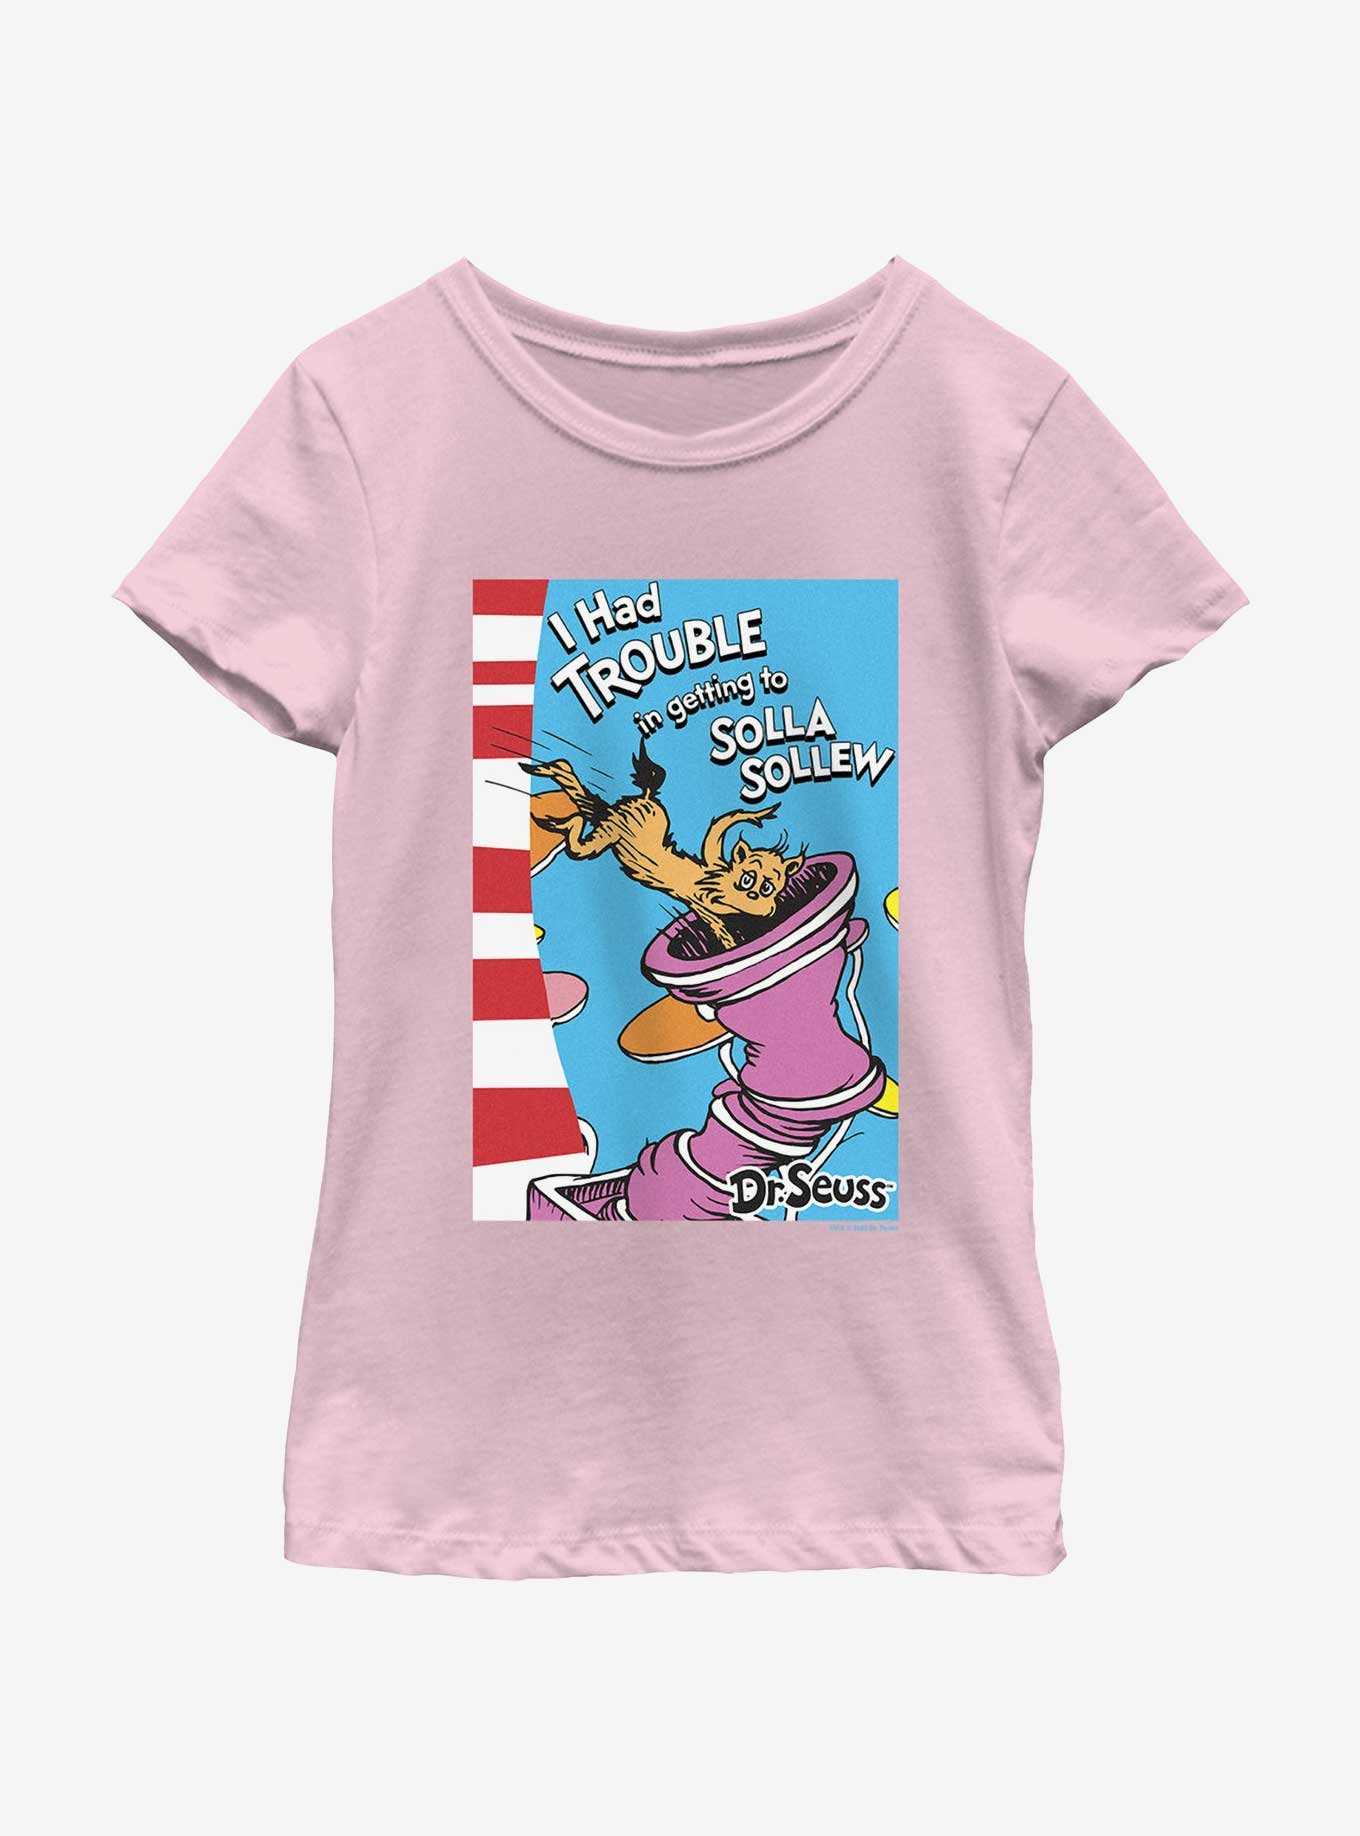 Dr. Seuss's I Had Trouble Getting Into Solla Sollew Cover Youth Girls T-Shirt, , hi-res